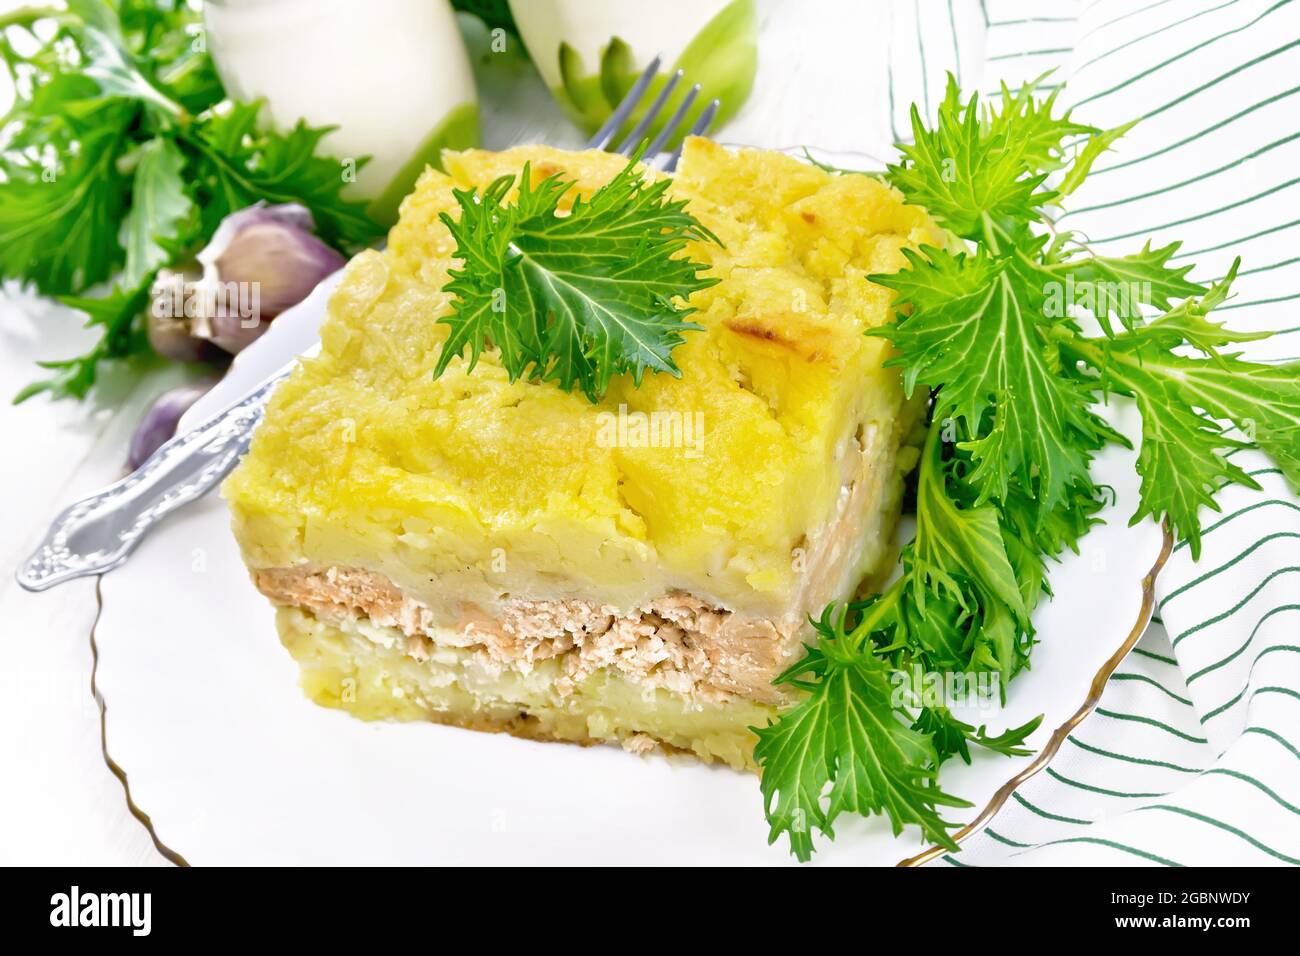 Mashed potato casserole with salmon fillet and lettuce in a plate, napkin, garlic on a white wooden board background Stock Photo